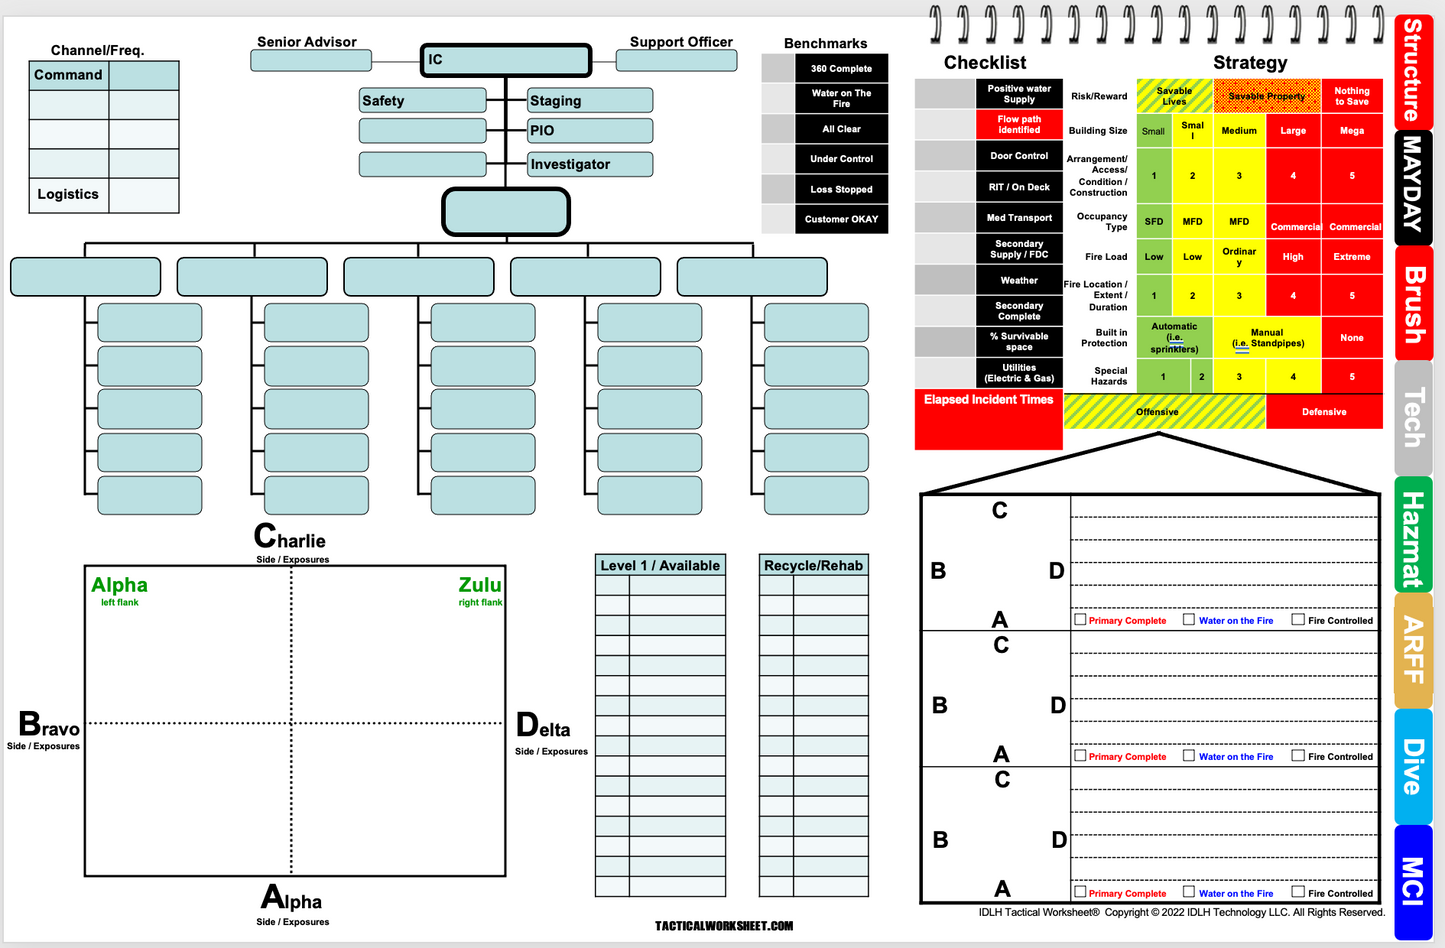 IDLH Tactical Worksheet Command Board - Complete checklist display for incident commanders.